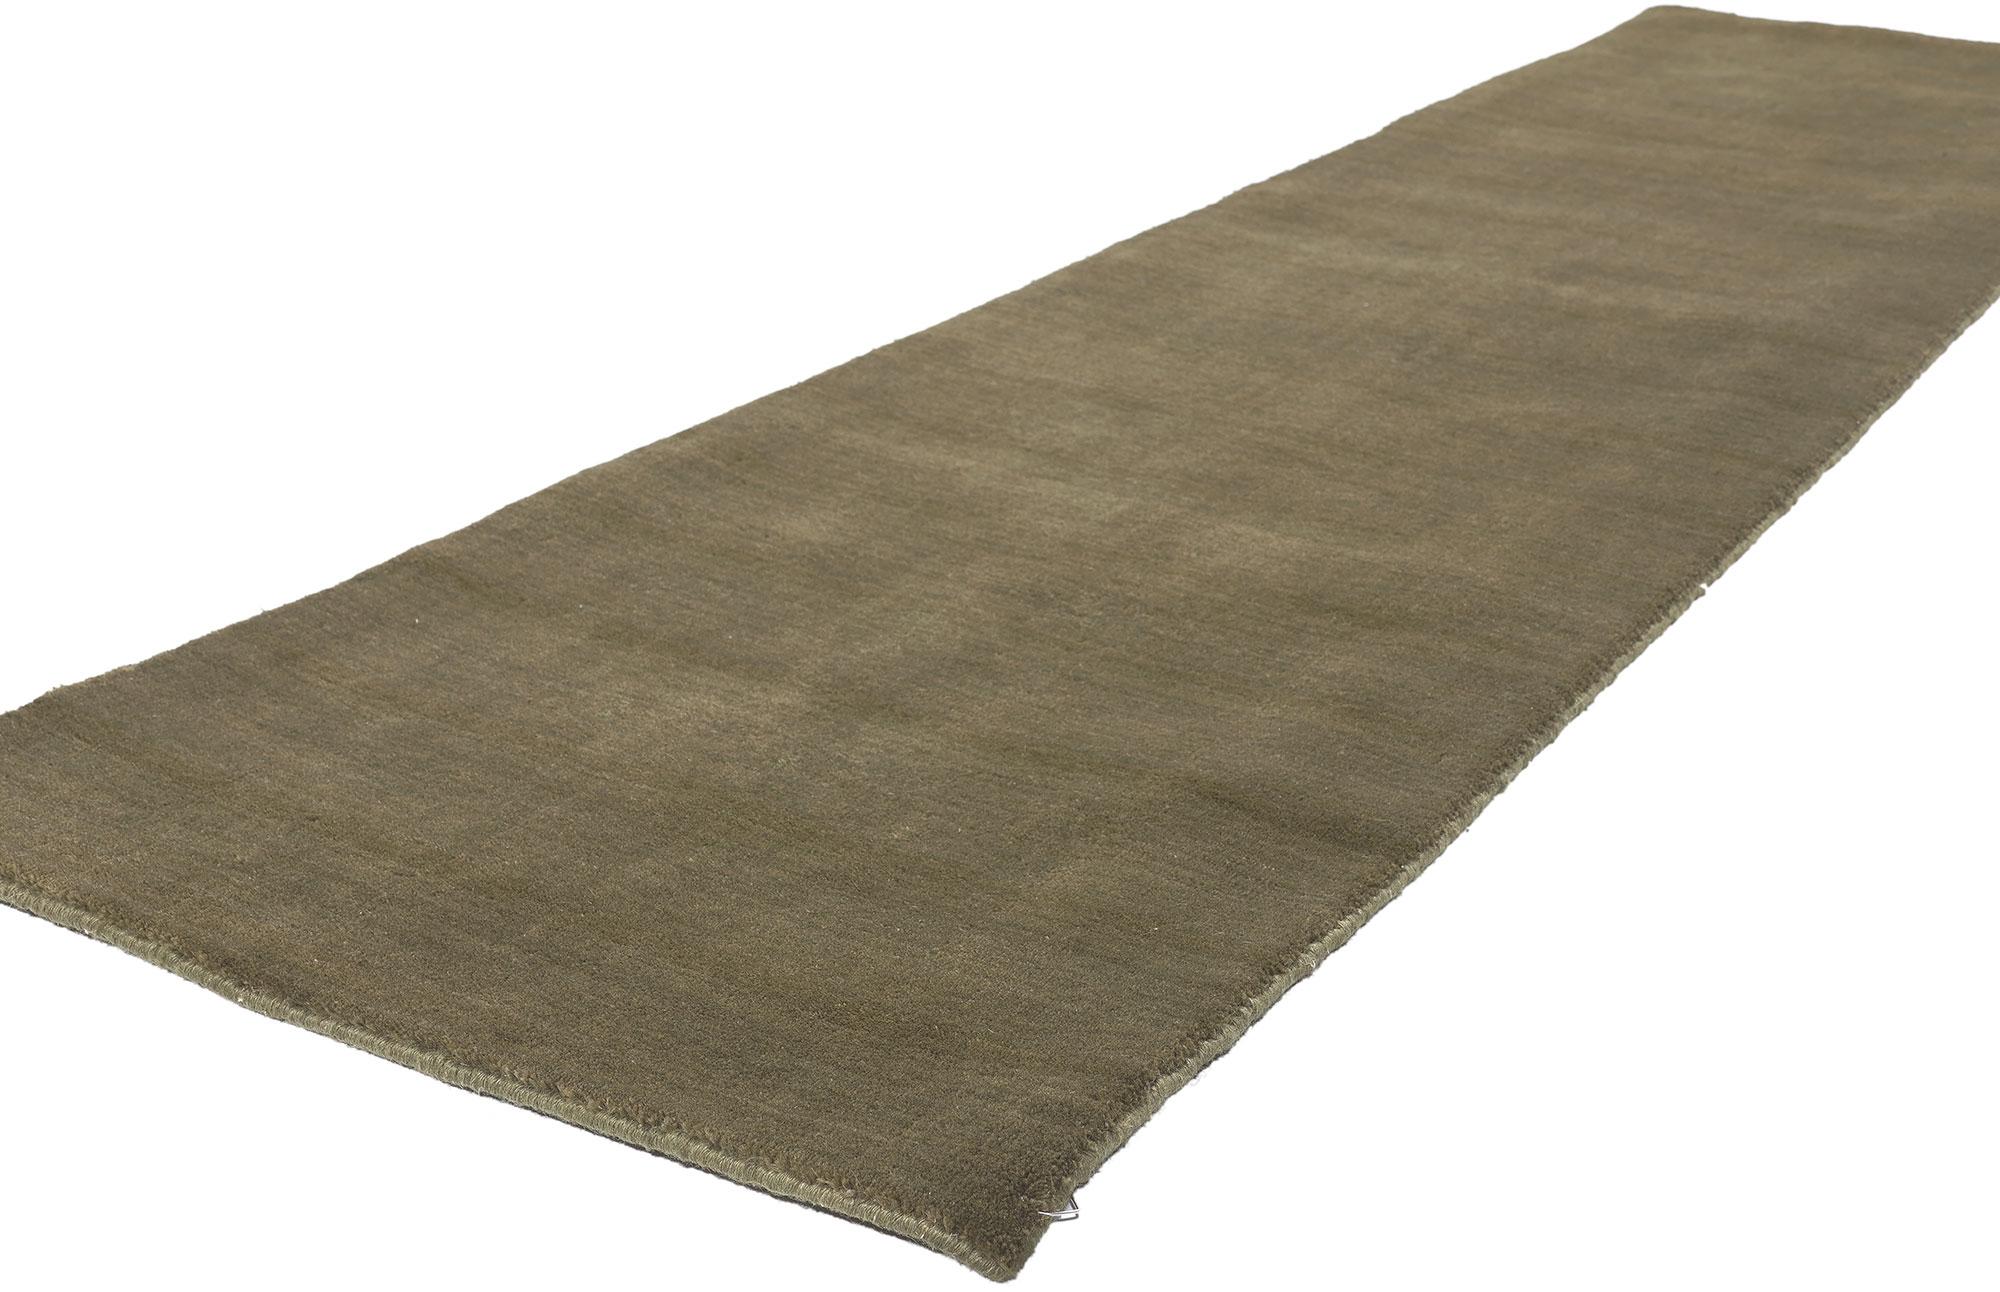 30996 New Moss-Olive Green Modern Rug, 02'01 x 08'09.
Biophilic Design meets earth-tone elegance in this handcrafted modern olive green area rug. The lavish texture and earthy green colorway woven into this piece work together creating a truly